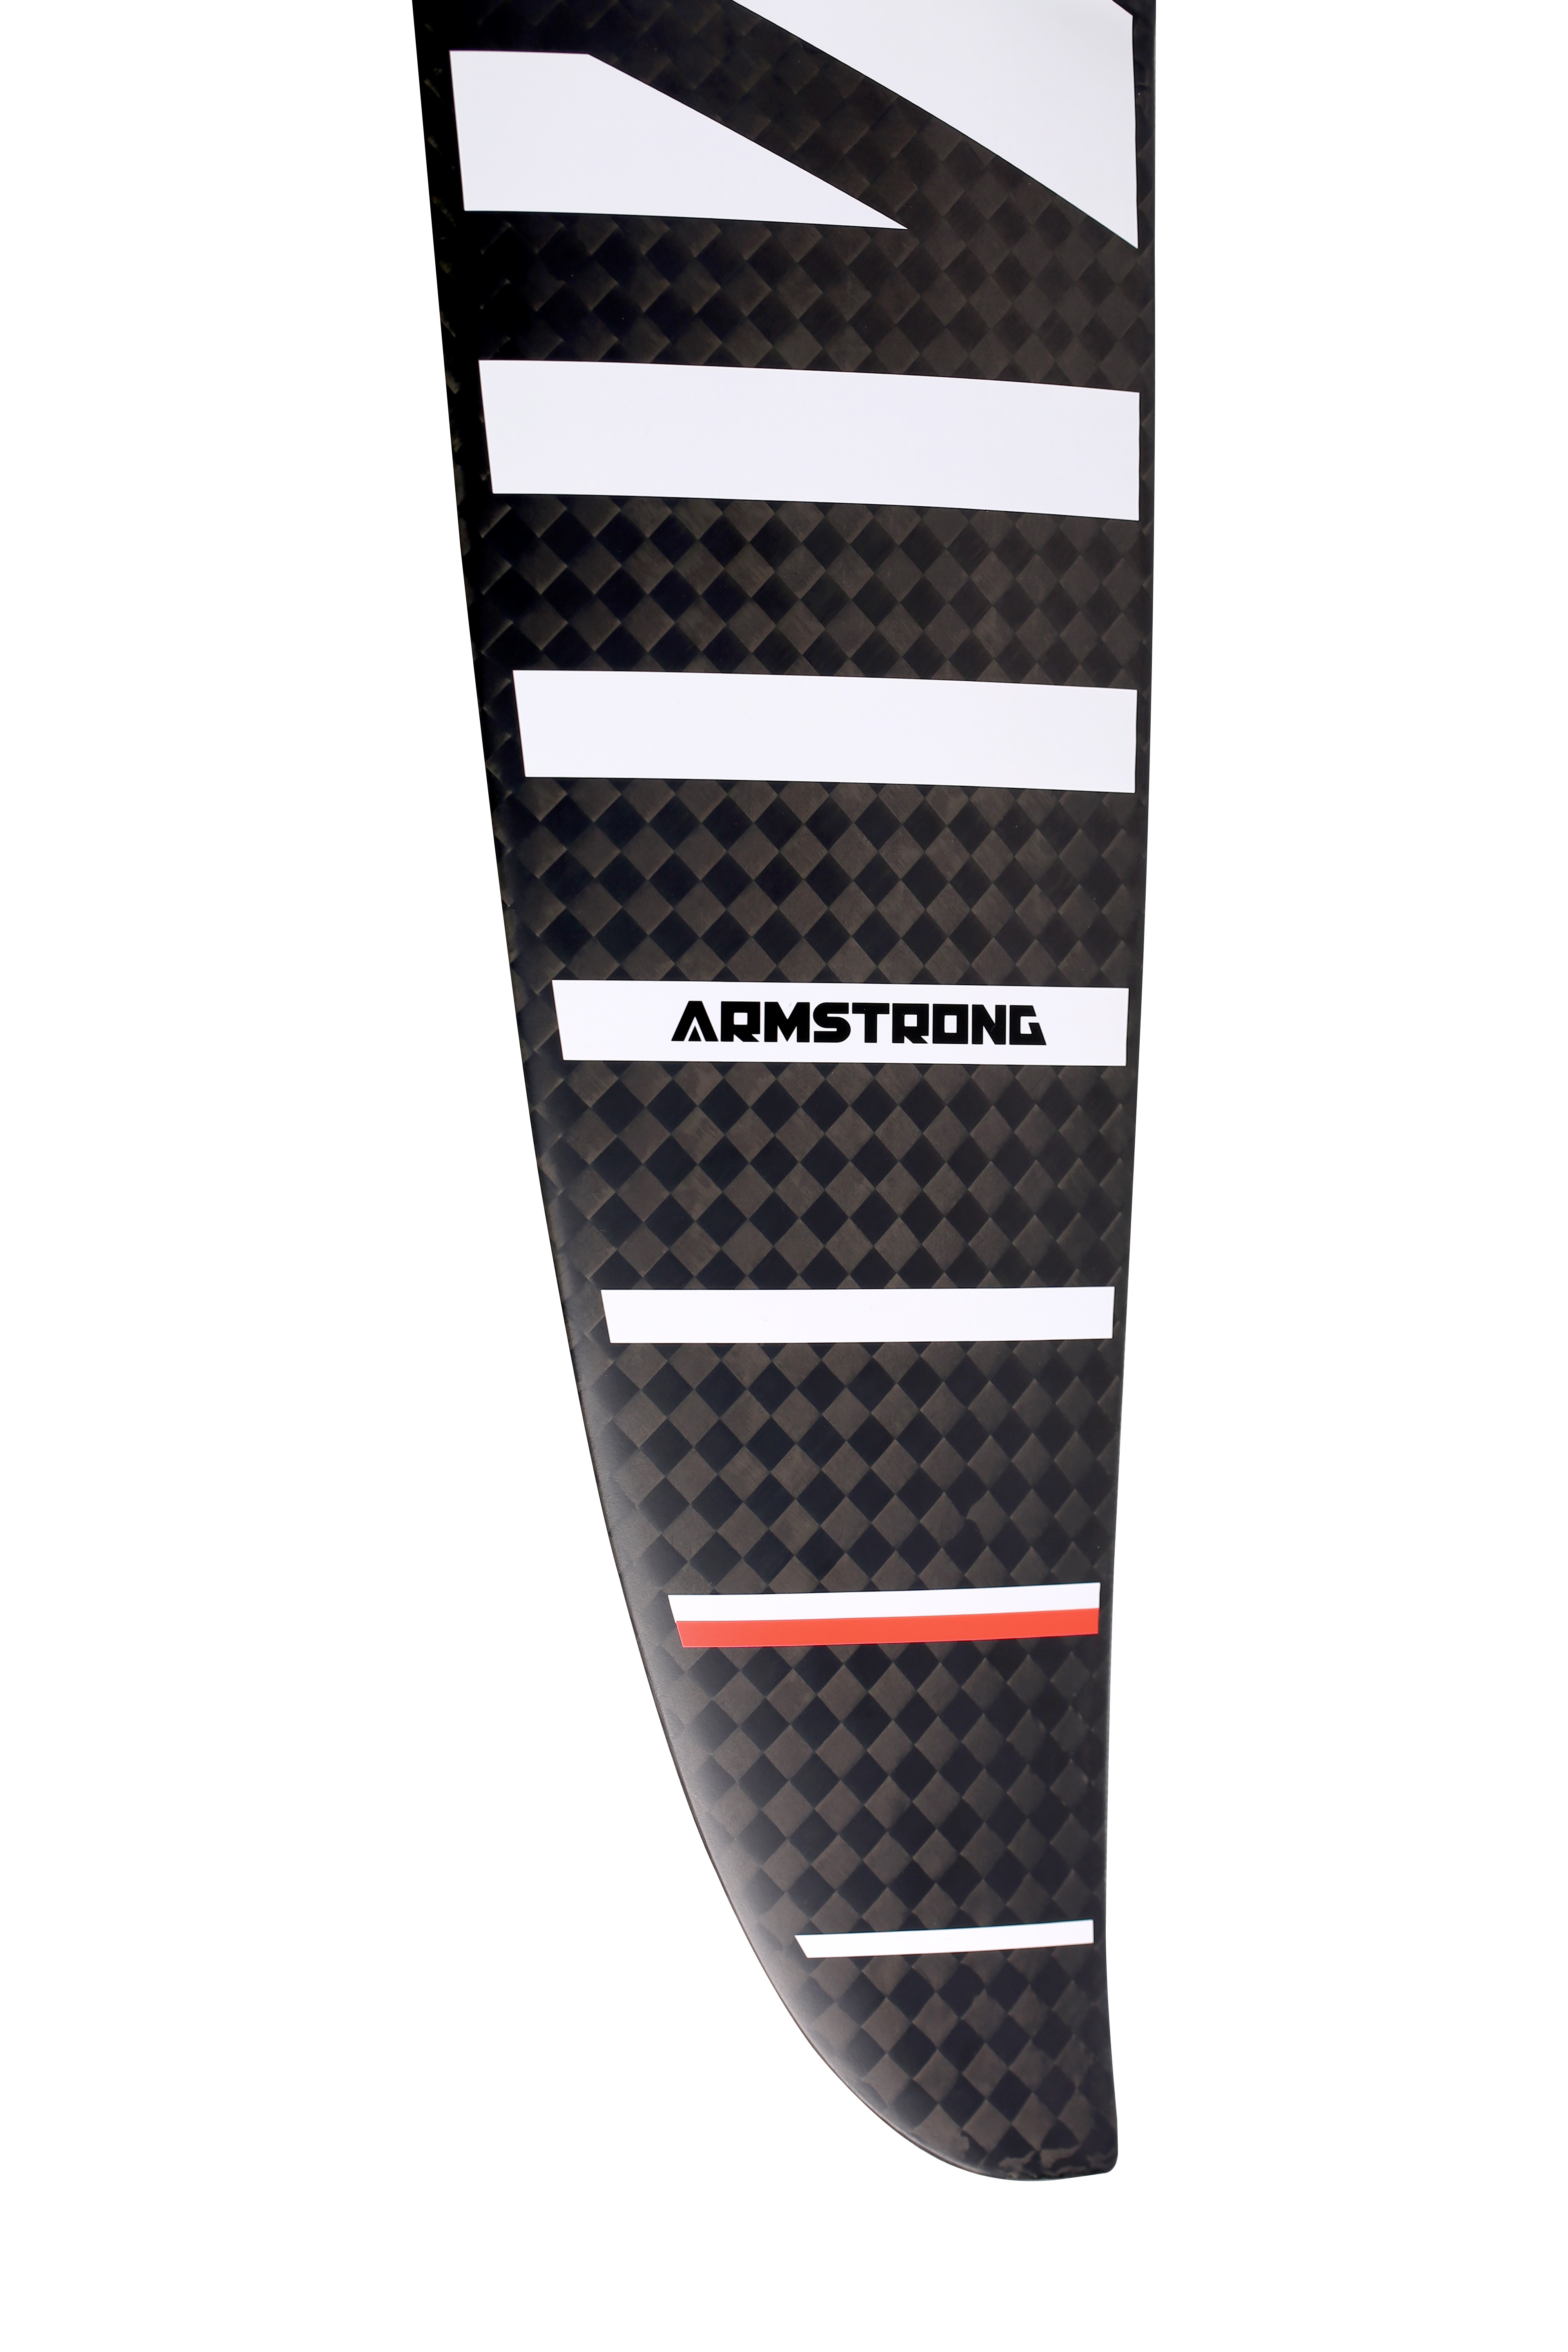 Armstrong Foil Frontwing MA 1225